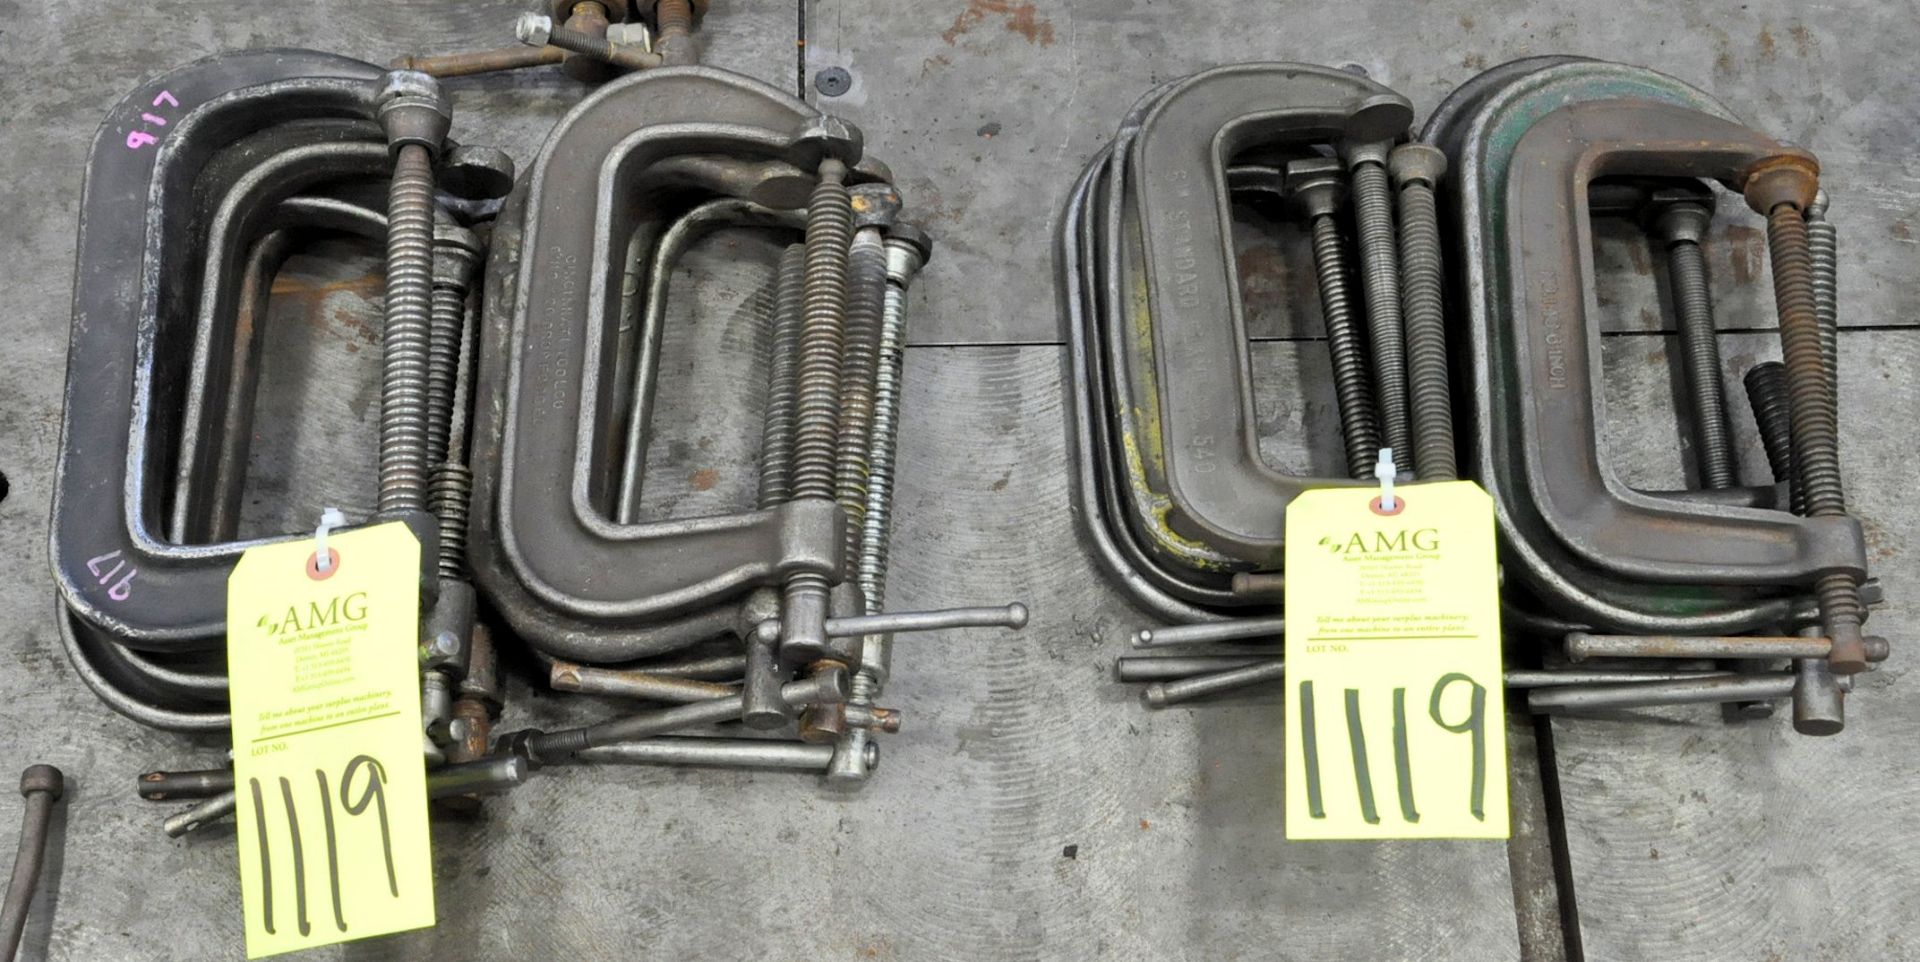 Lot-6" C-Clamps in (4) Stacks, (G-15), (Yellow Tag)